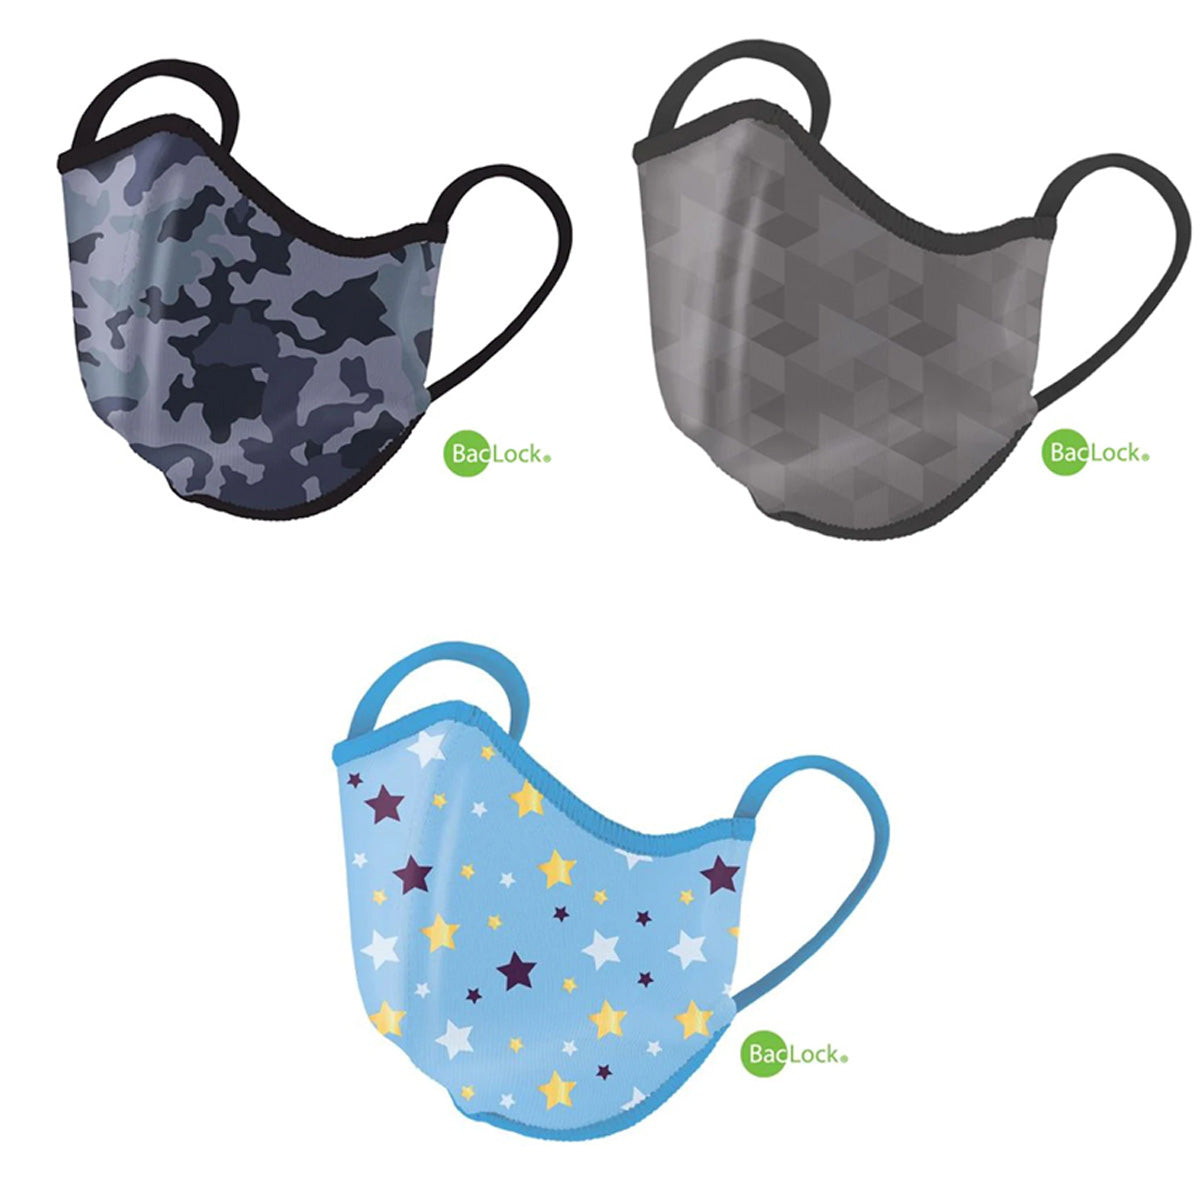 Norwex Adult Reusable Face Mask with BacLock, 3 styles